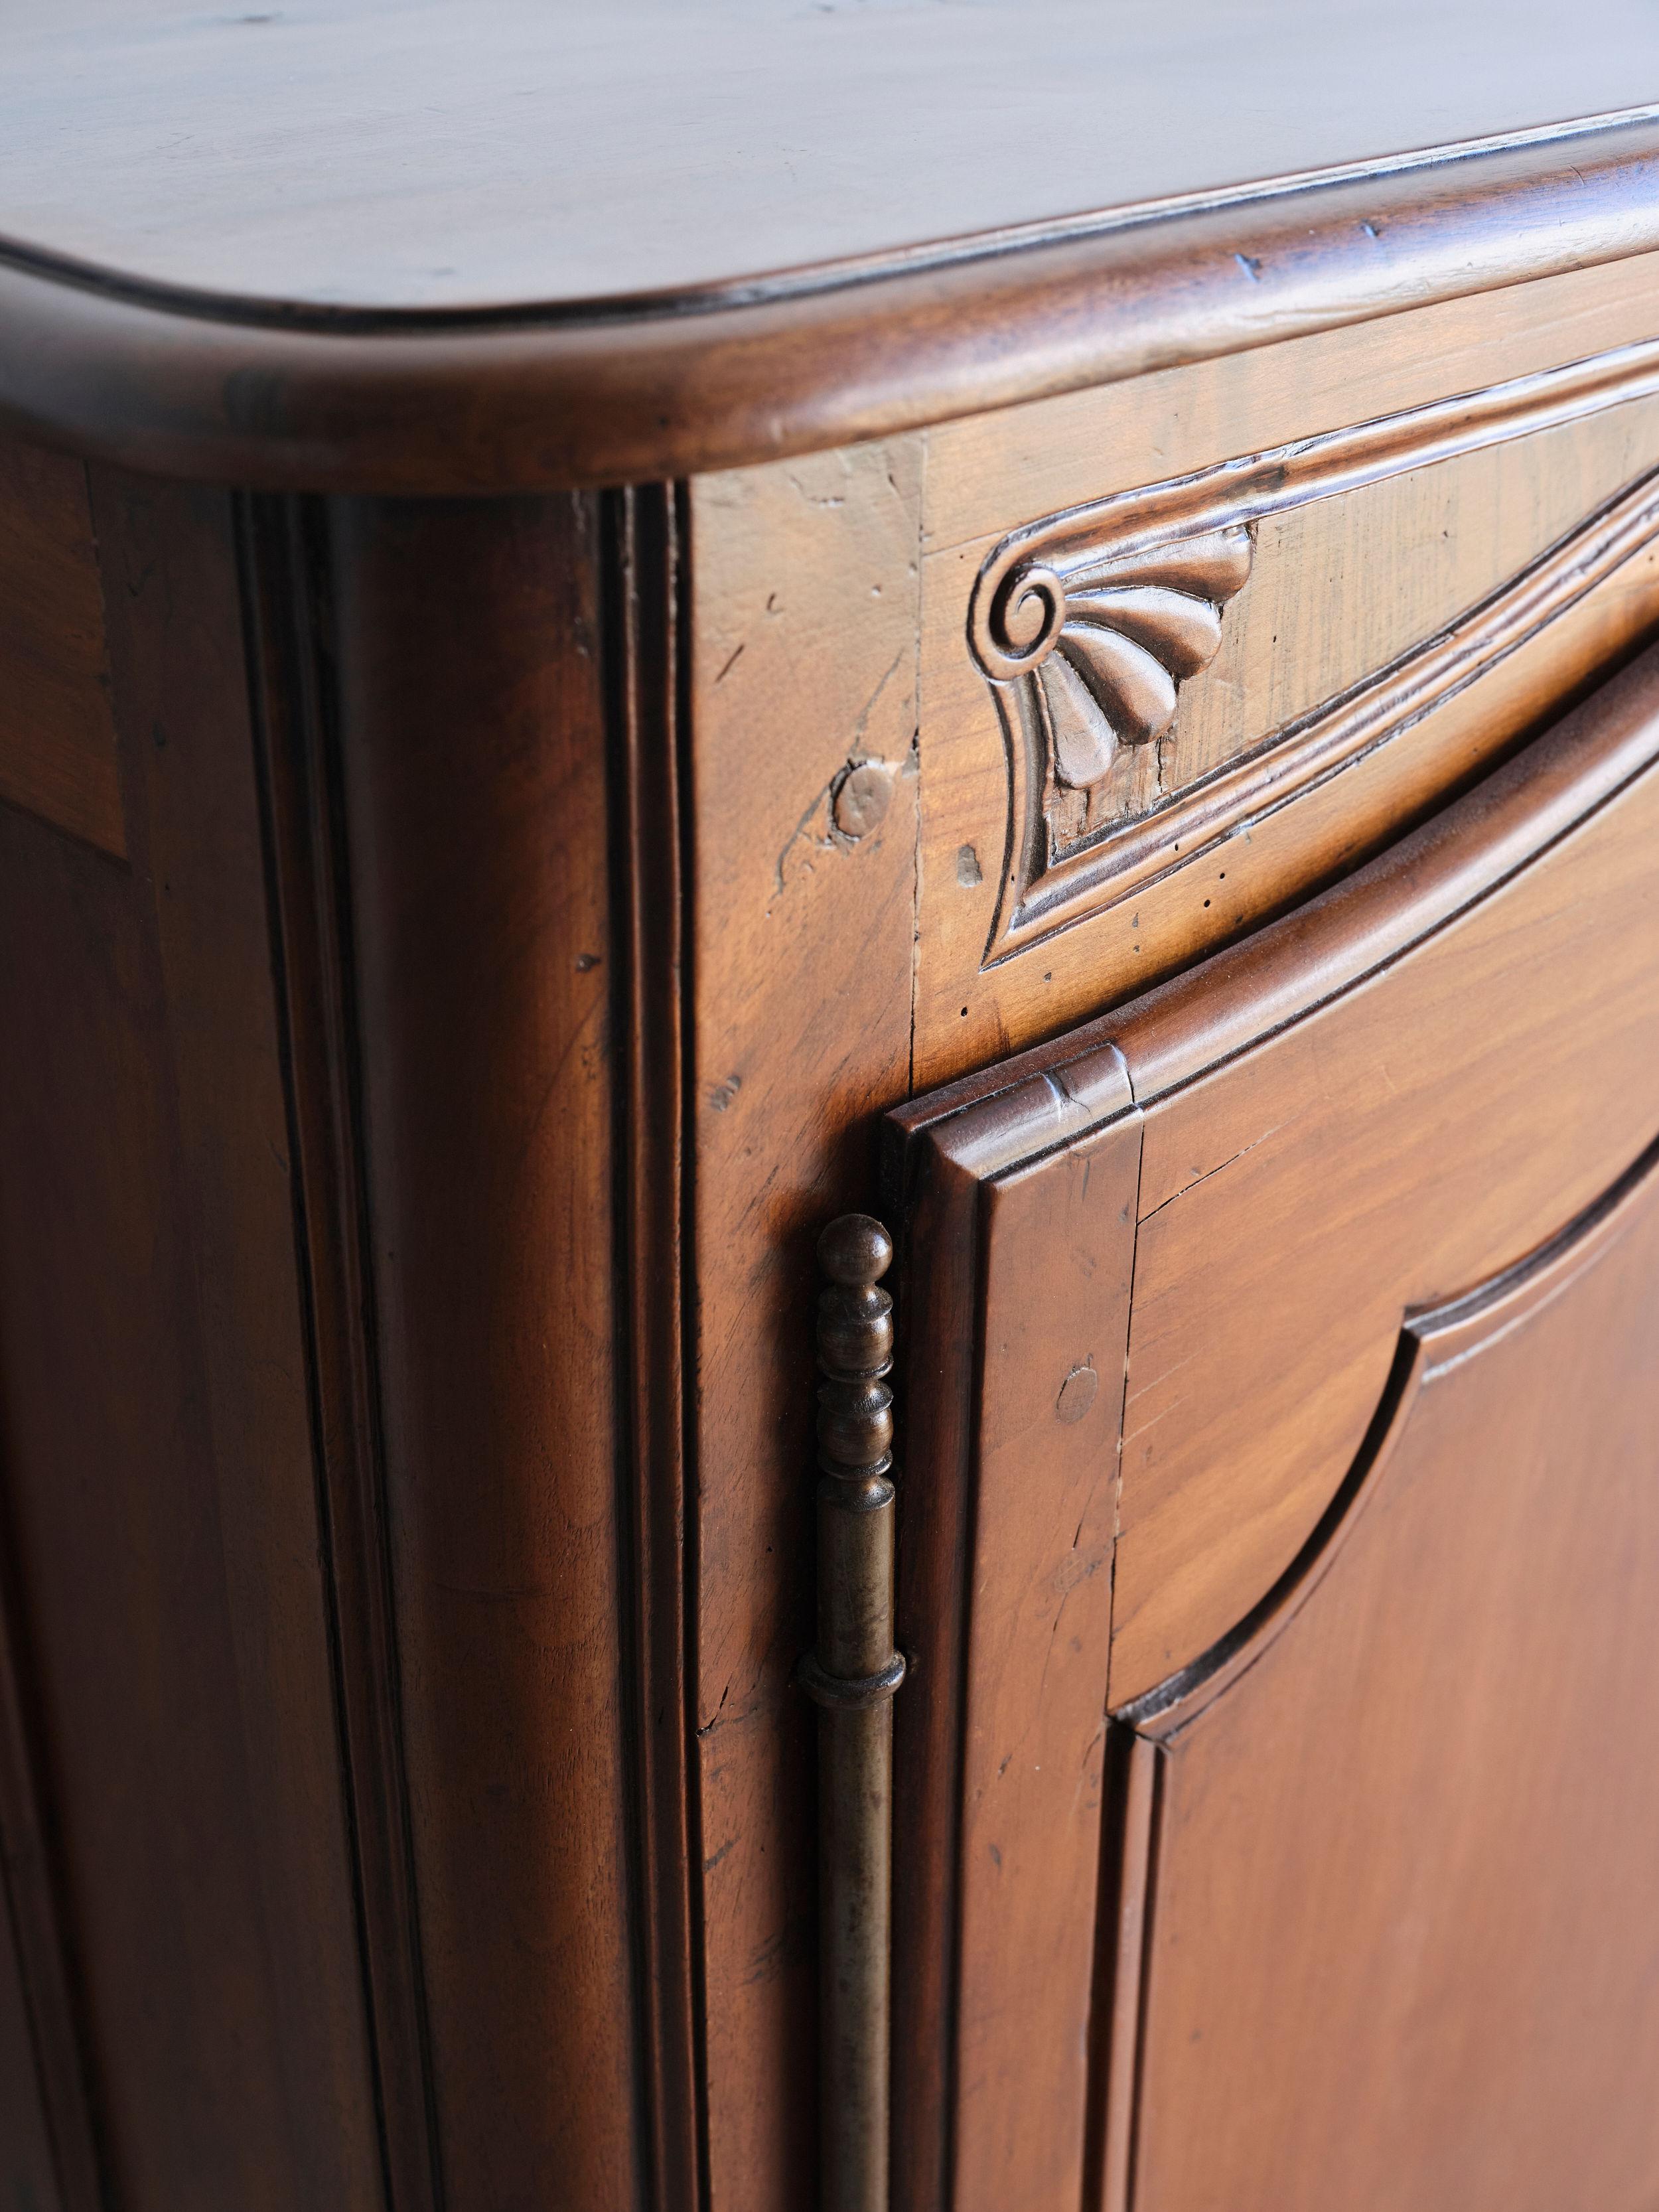 This stunning 18th century Louis XV style enfilade features a warm patina stain and beautiful hand carved details. There are 4 small central drawers and two outside cabinet doors that open to an interior shelf on each side. All of the hardware is